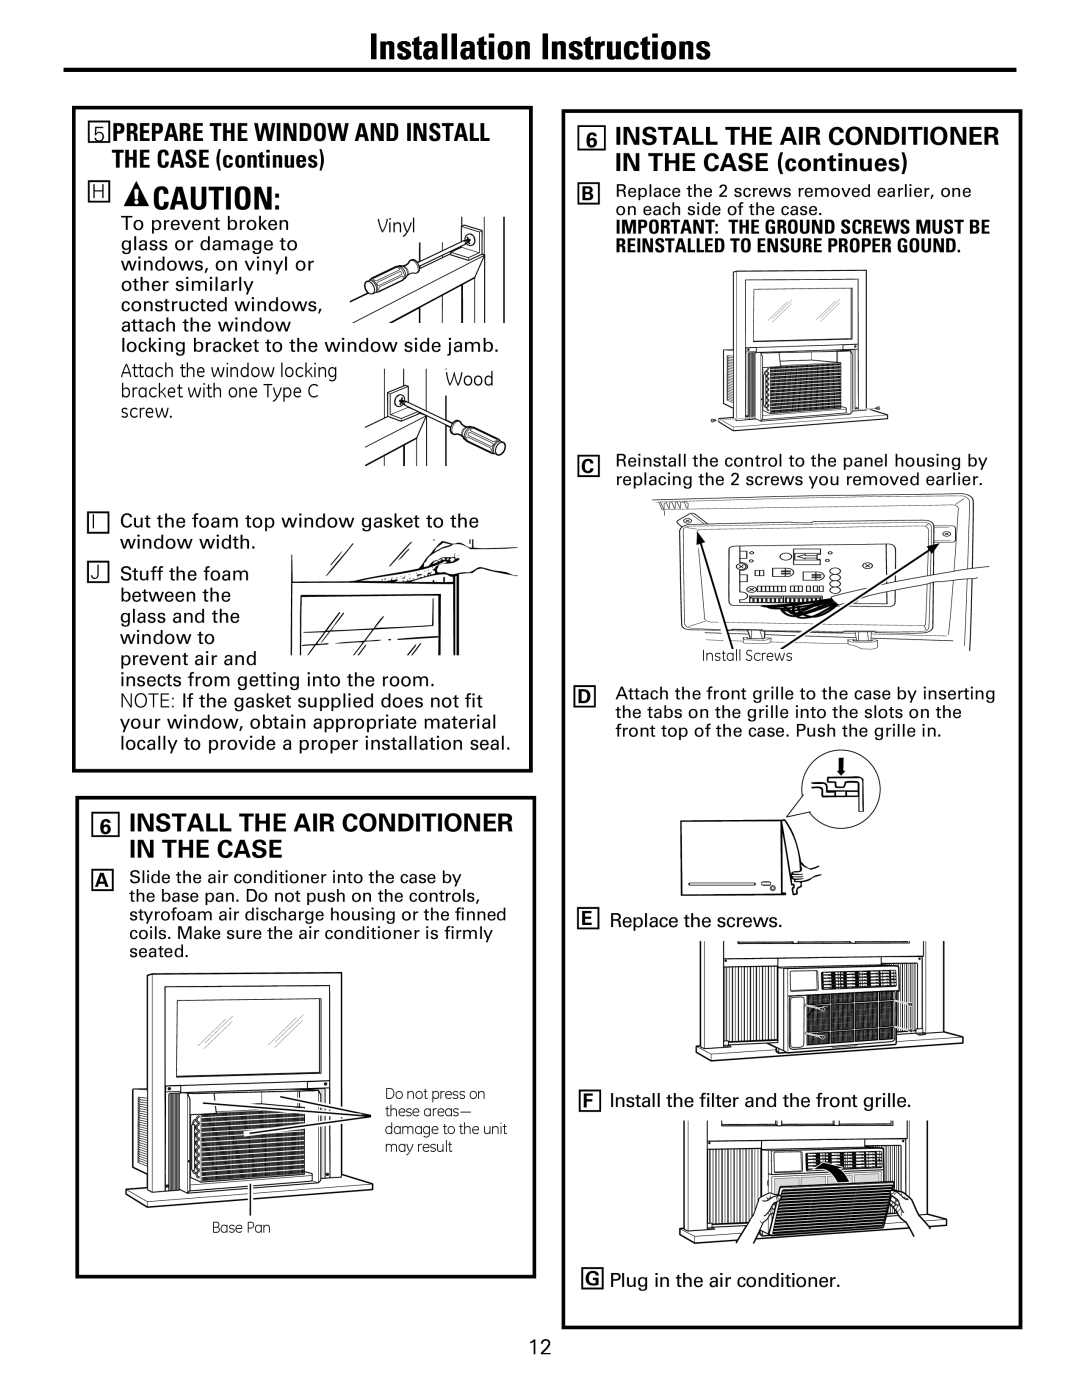 GE AEQ25, AEM25 HCAuTiON, 6INSTALL THE AIR CONDITIONER IN THE CASE, IN THE CASE continues, installation instructions 